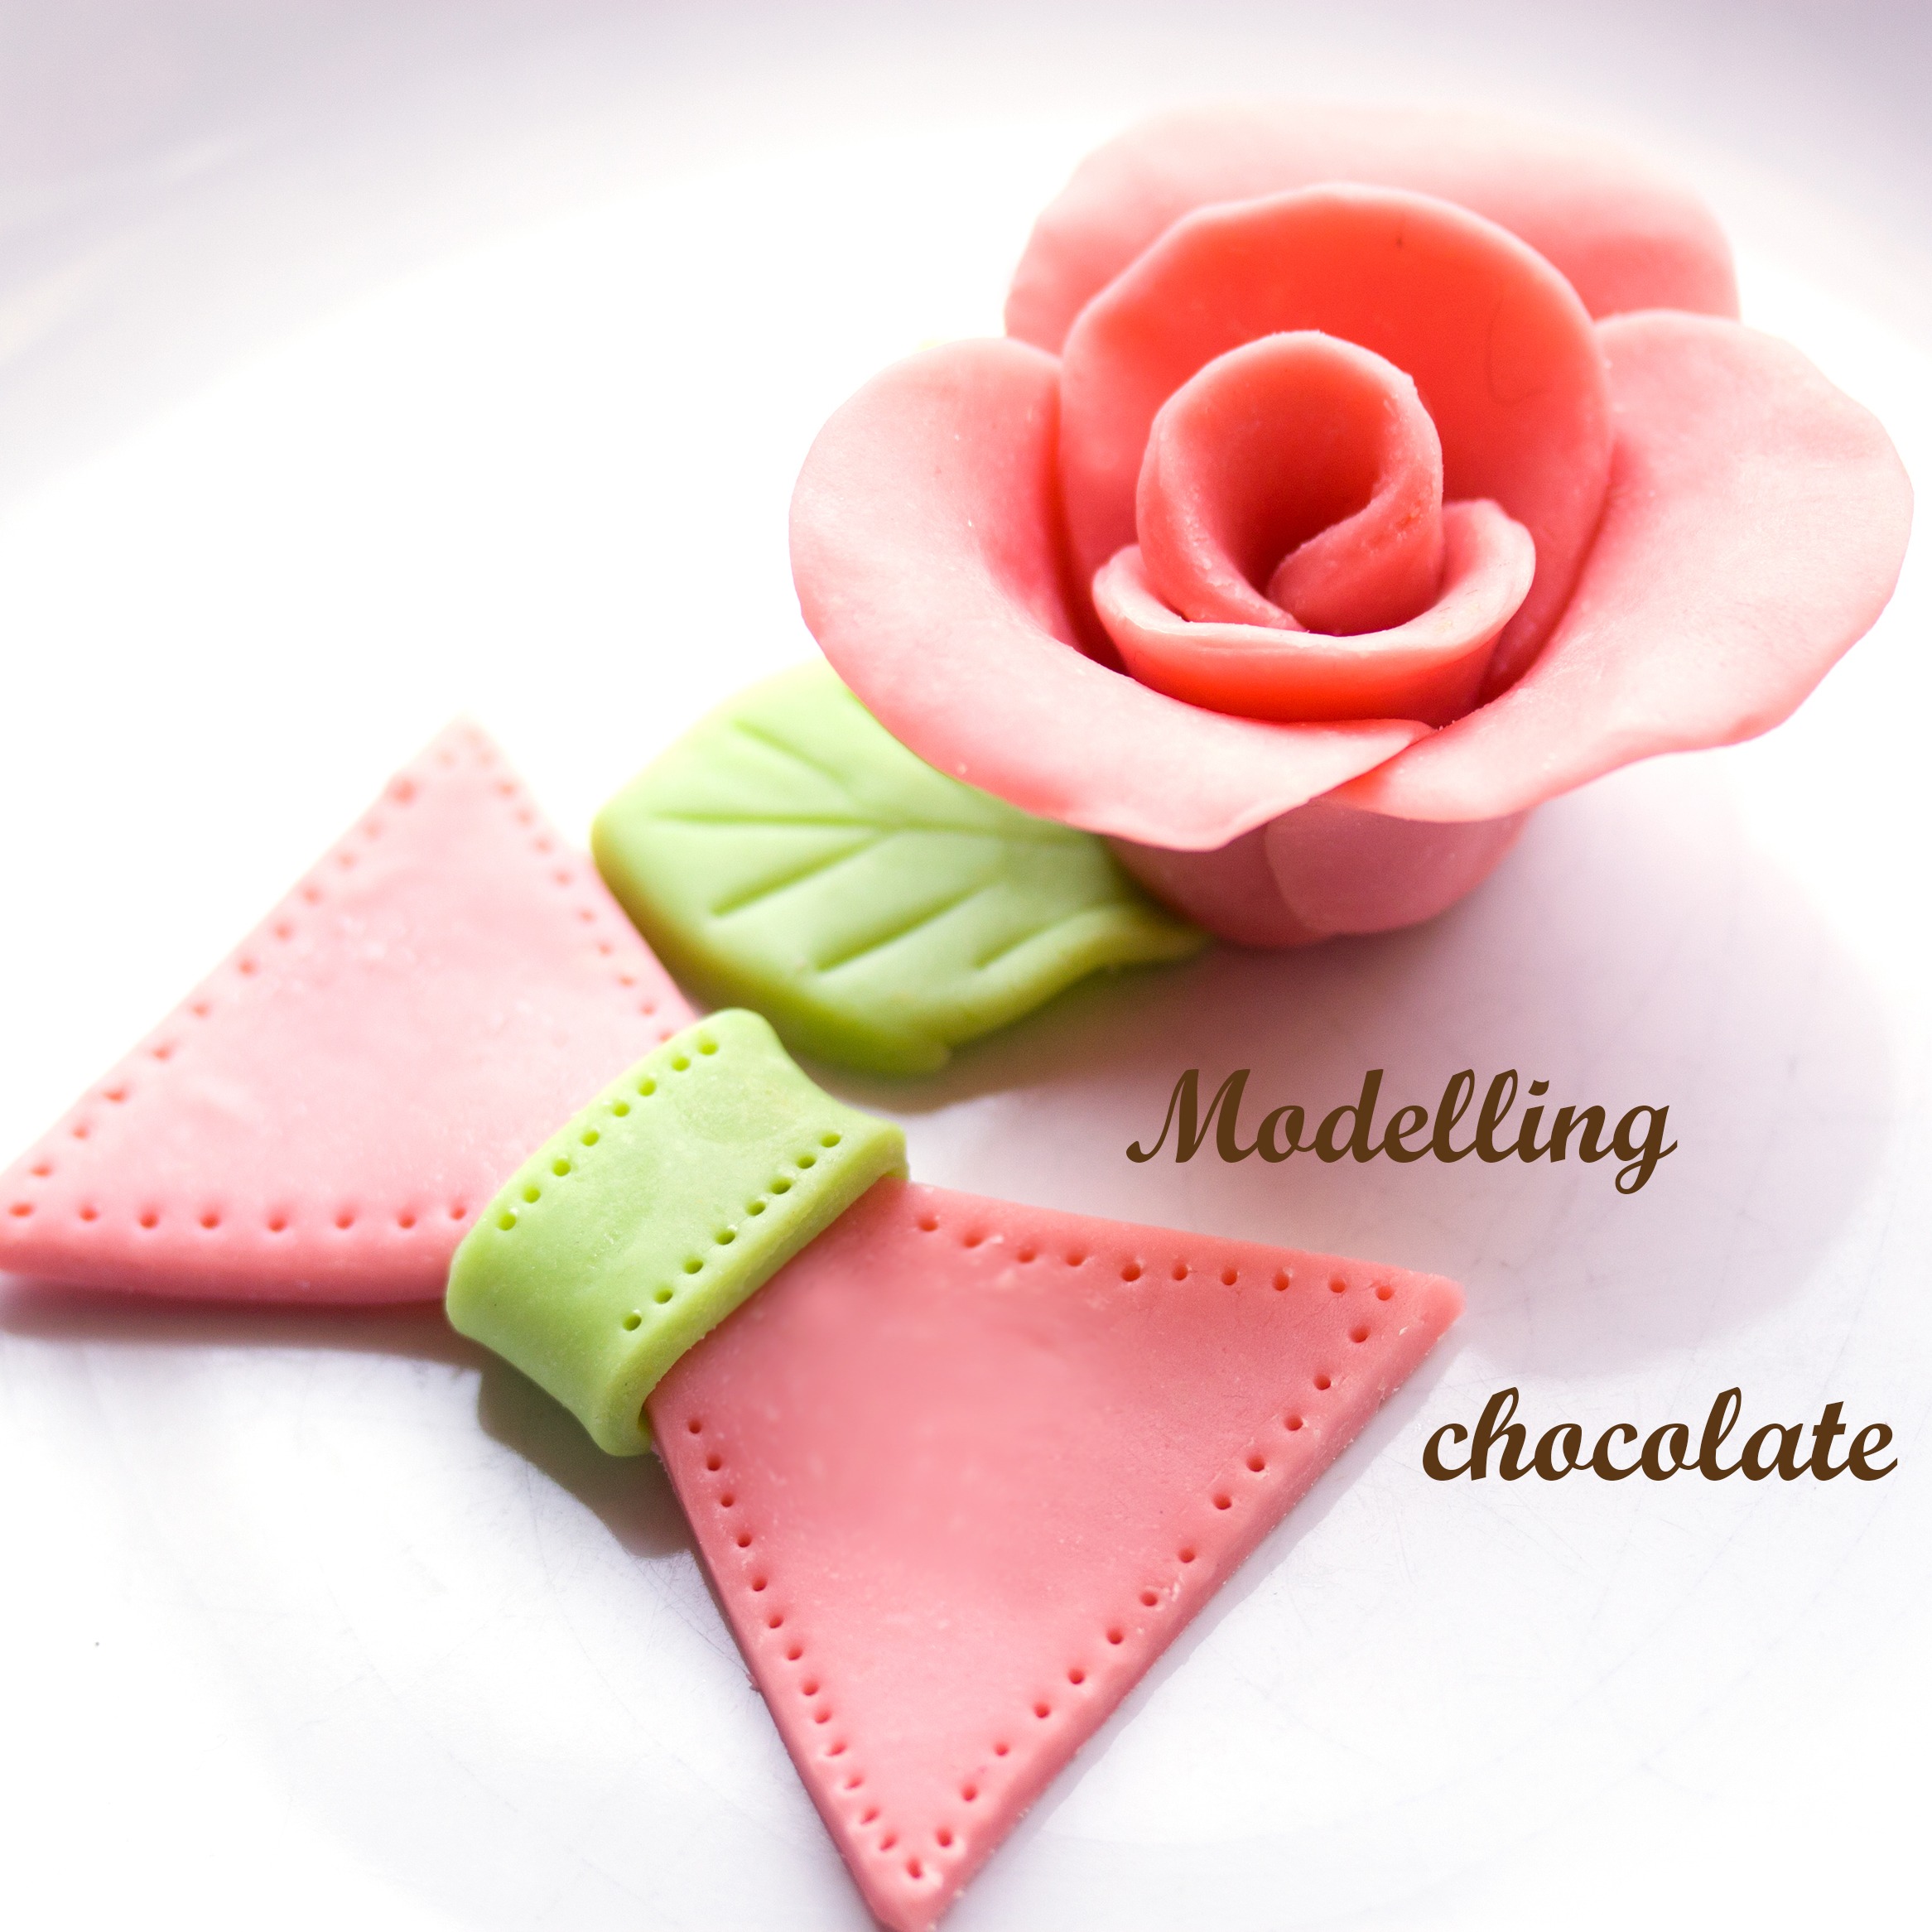 How to Make Modeling Chocolate Roses, chocolate